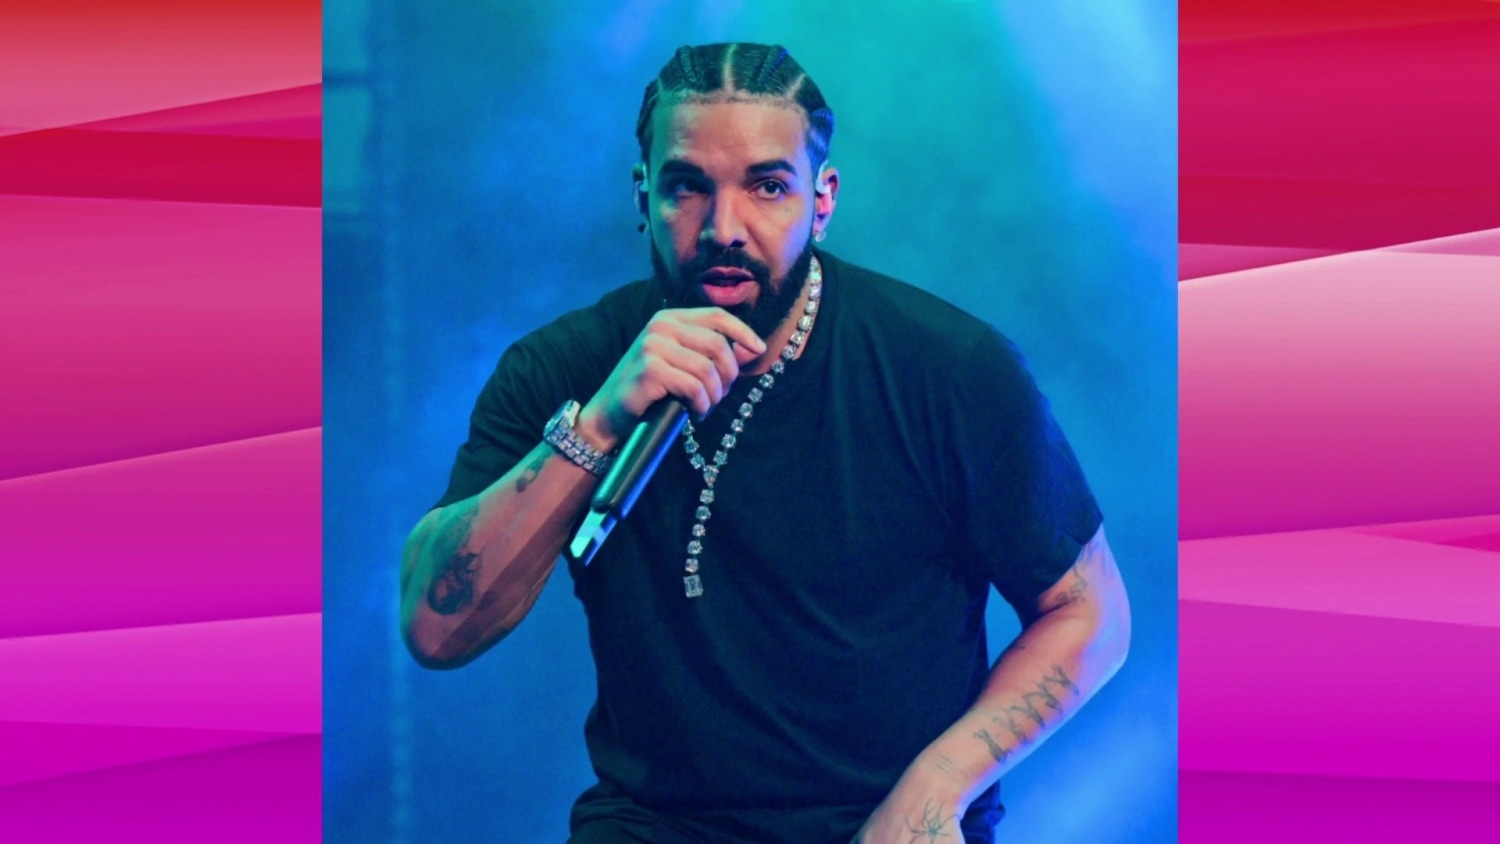 Drake has made several songs with weird lyrics about killing X. Do